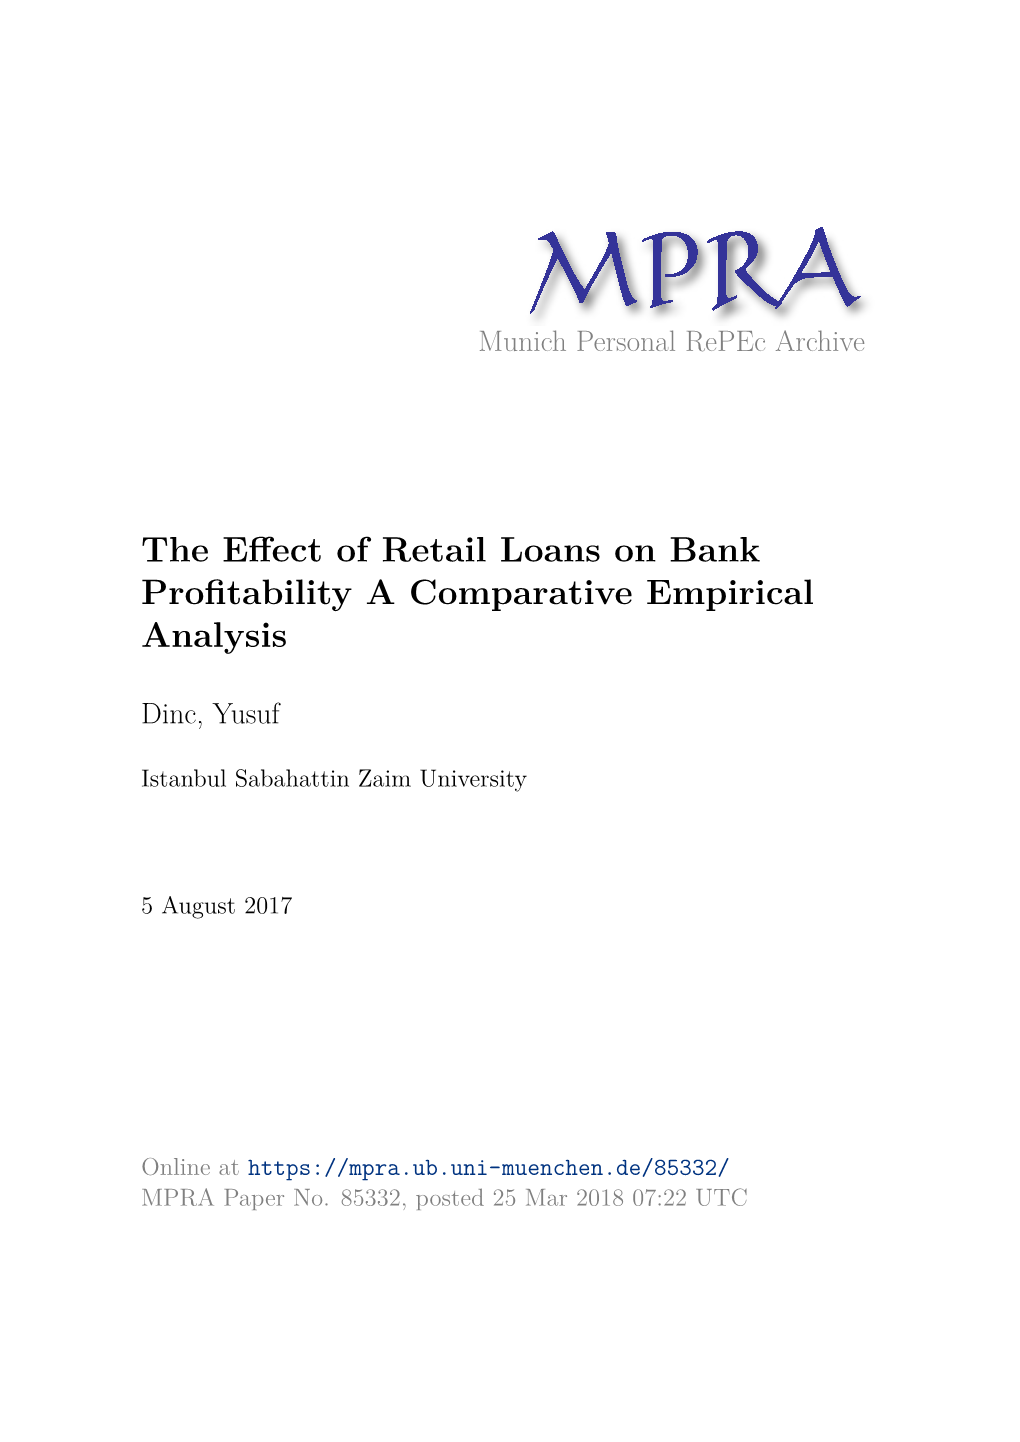 The Effect of Retail Loans on Bank Profitability a Comparative Empirical Analysis